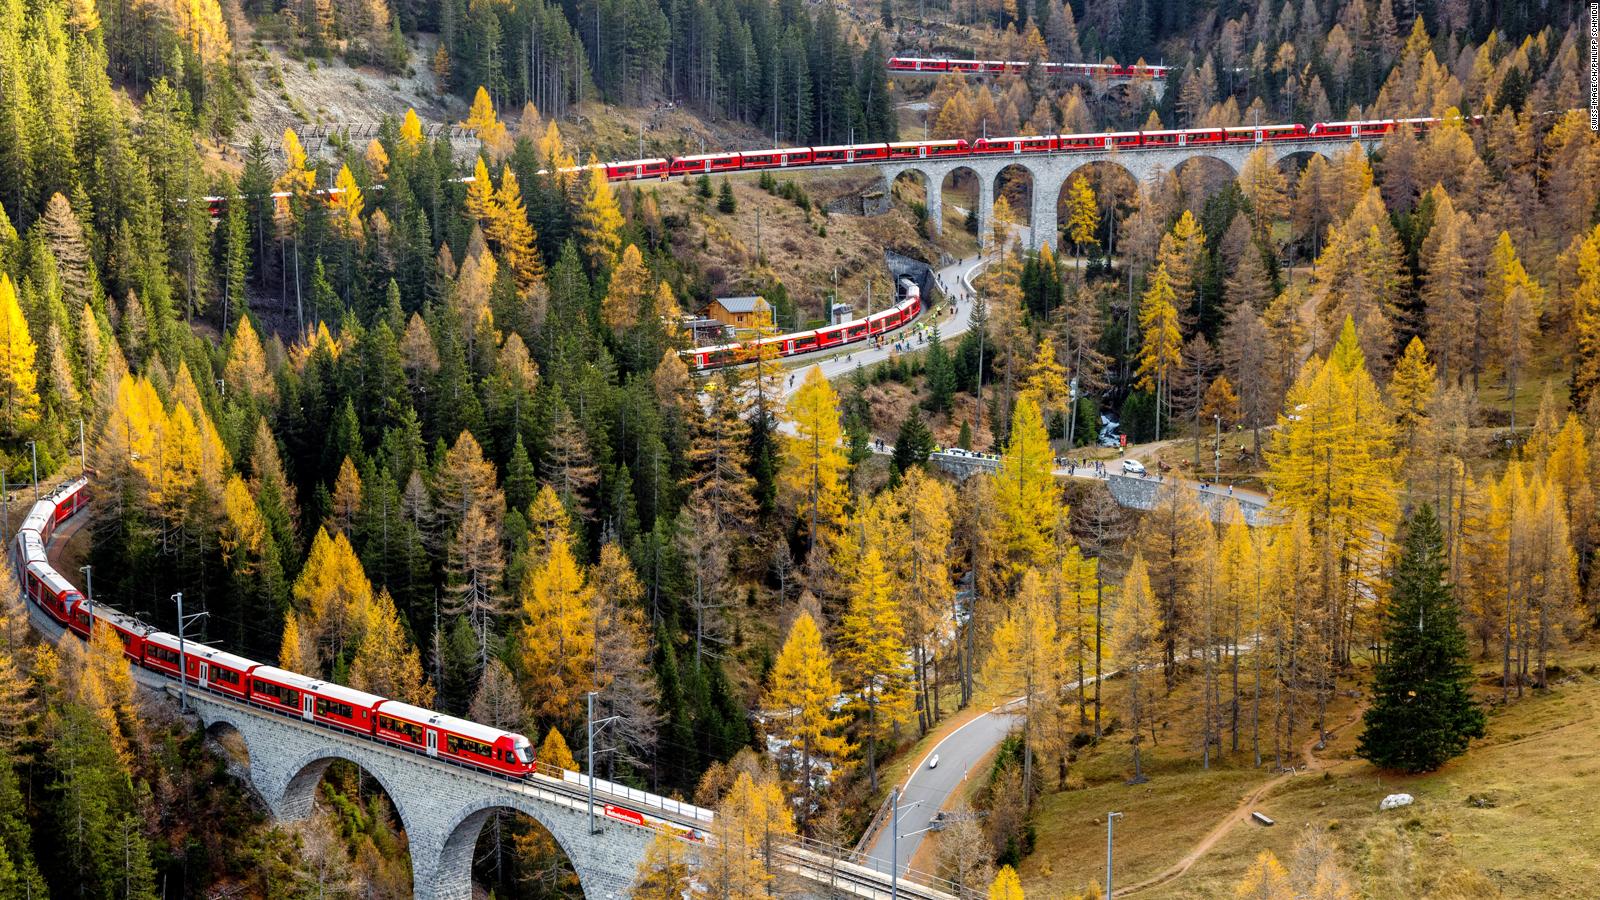 Switzerland Constructed A 2-kilometer-long Train And Here Is Why